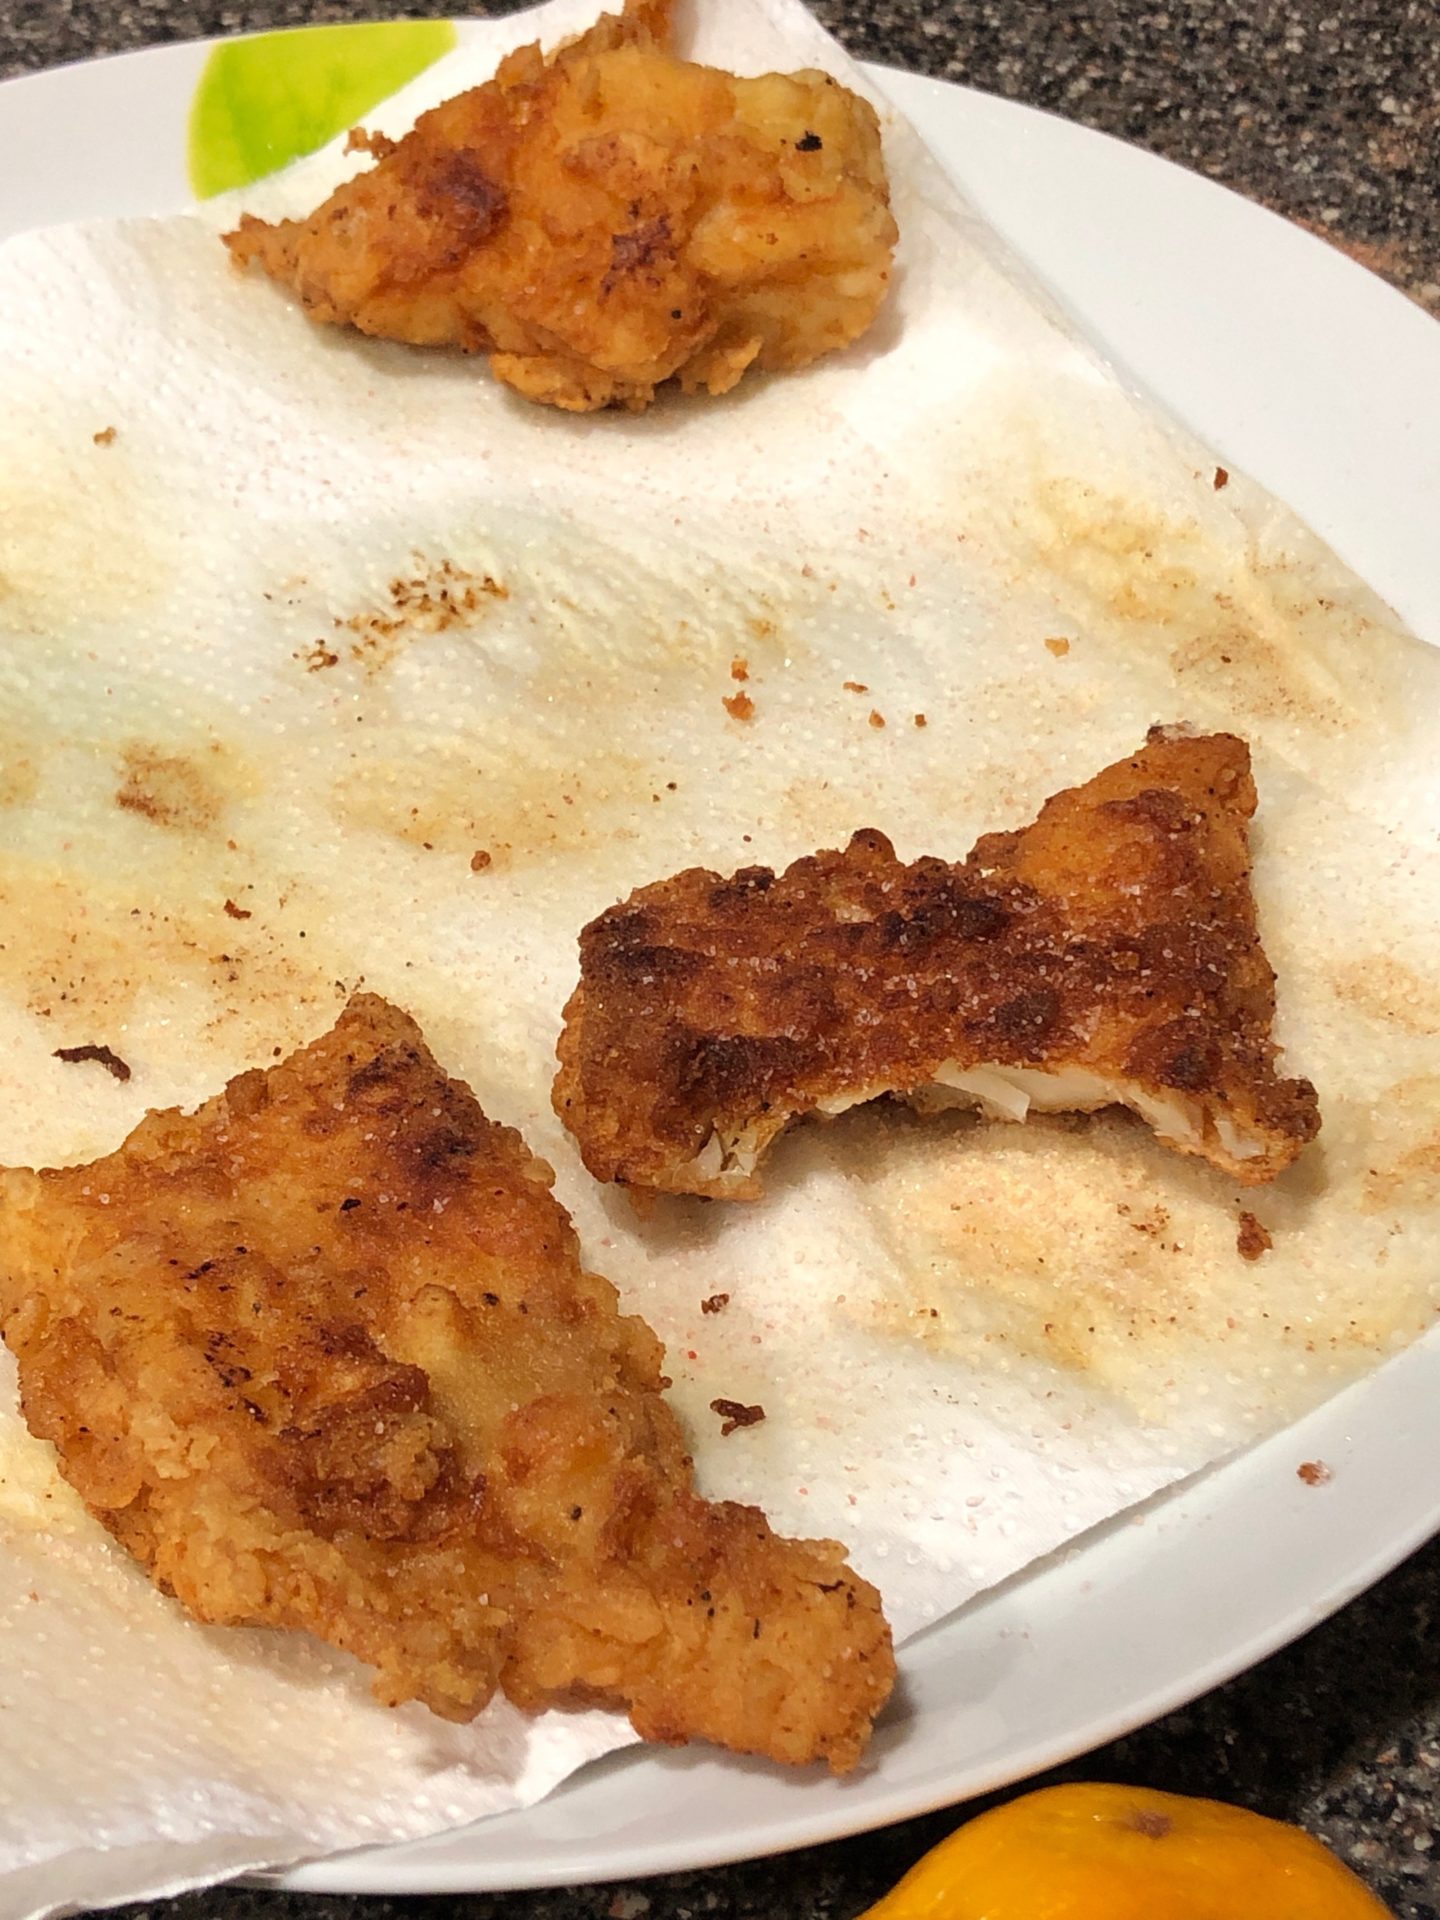 Fried Cod Made with Wild-Caught Fish from a Sitka Salmon Share 3